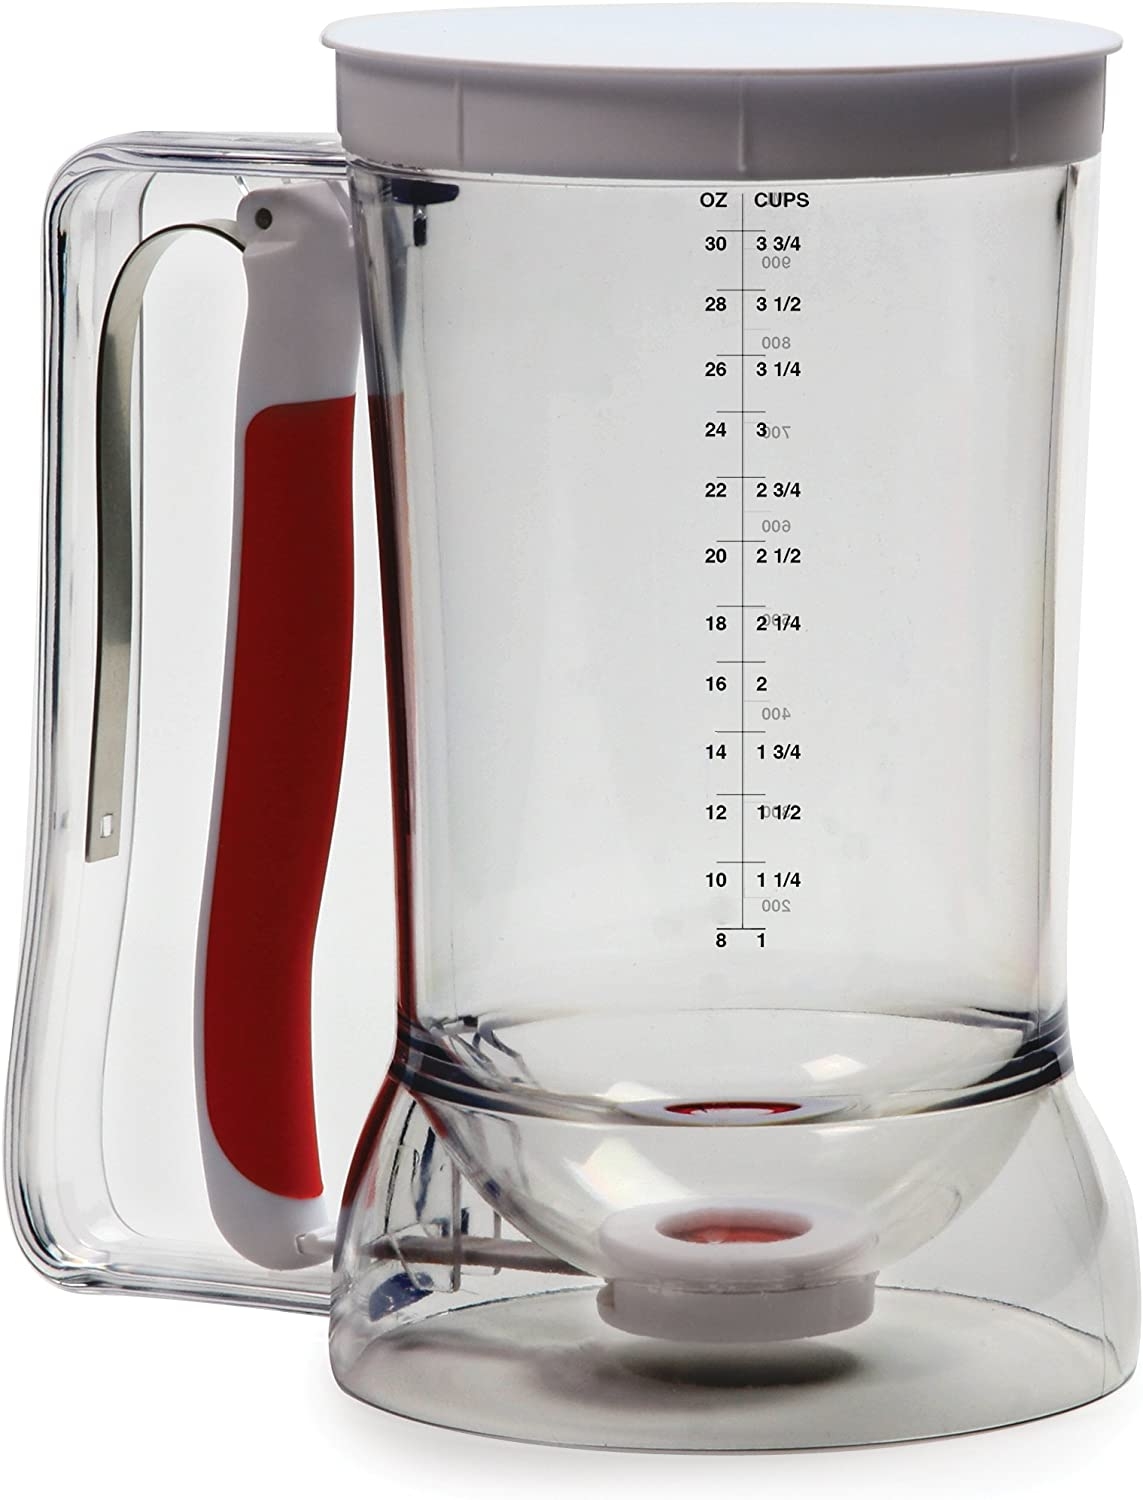 Norpro 1013 Batter Dispenser Clear/Red, 4 cup Import To Shop ×Product customization General Description Gallery Reviews